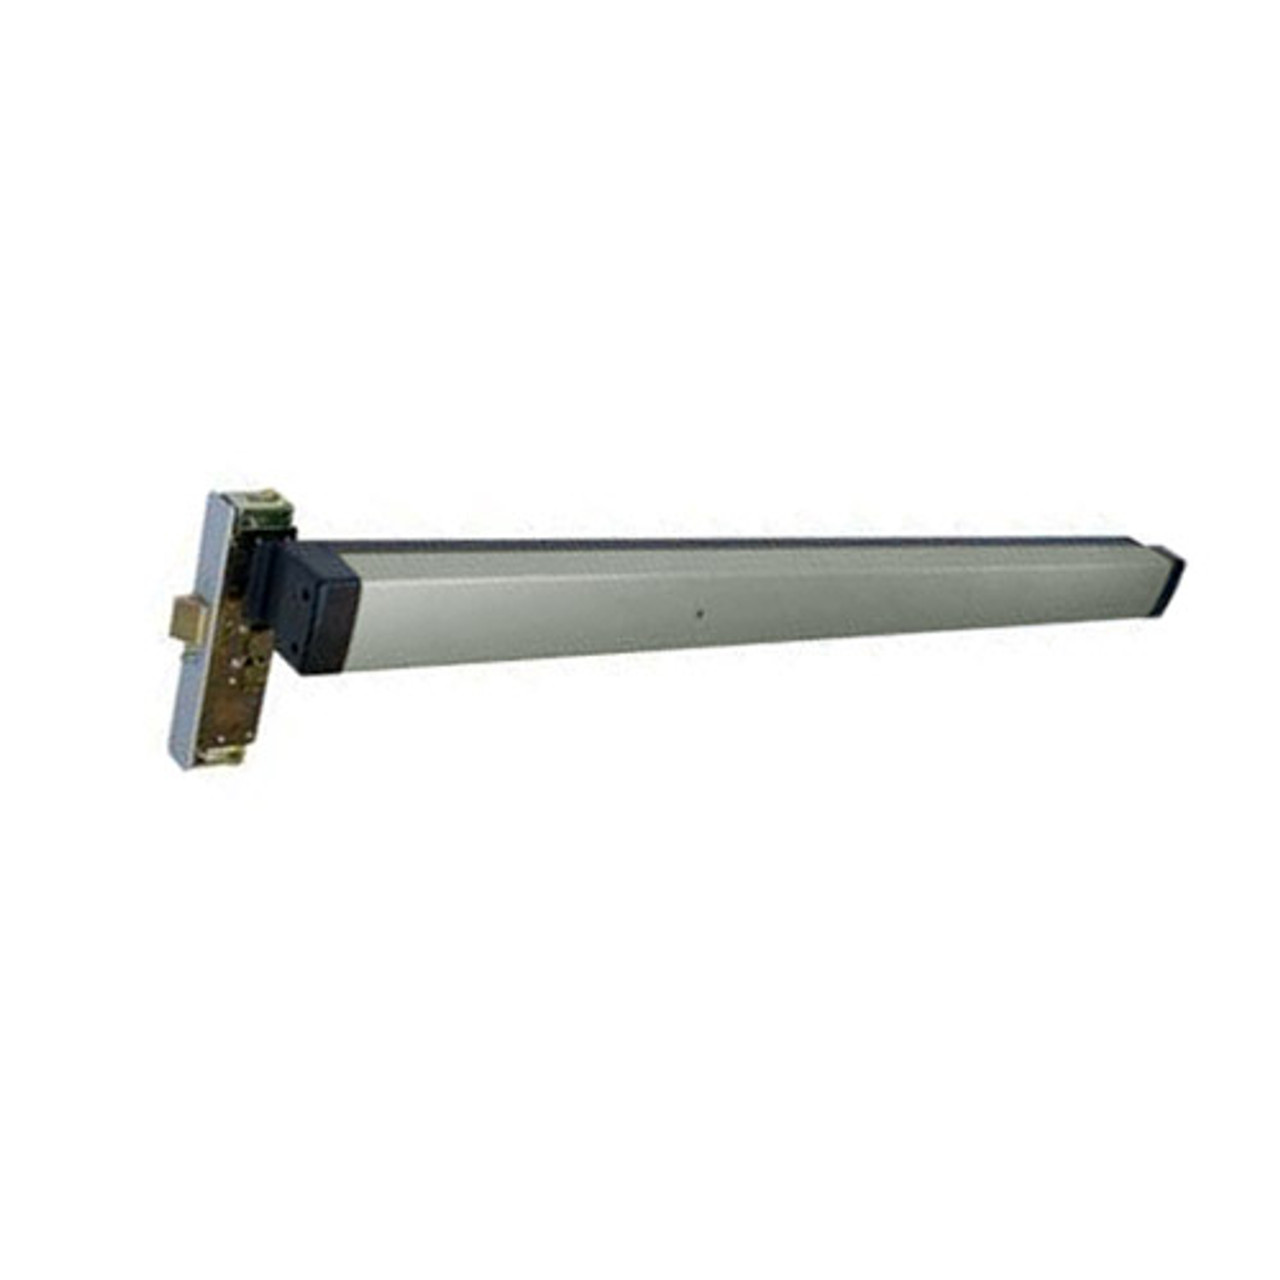 3300-M2-80-42-US32 Adams Rite Mortise Exit Device